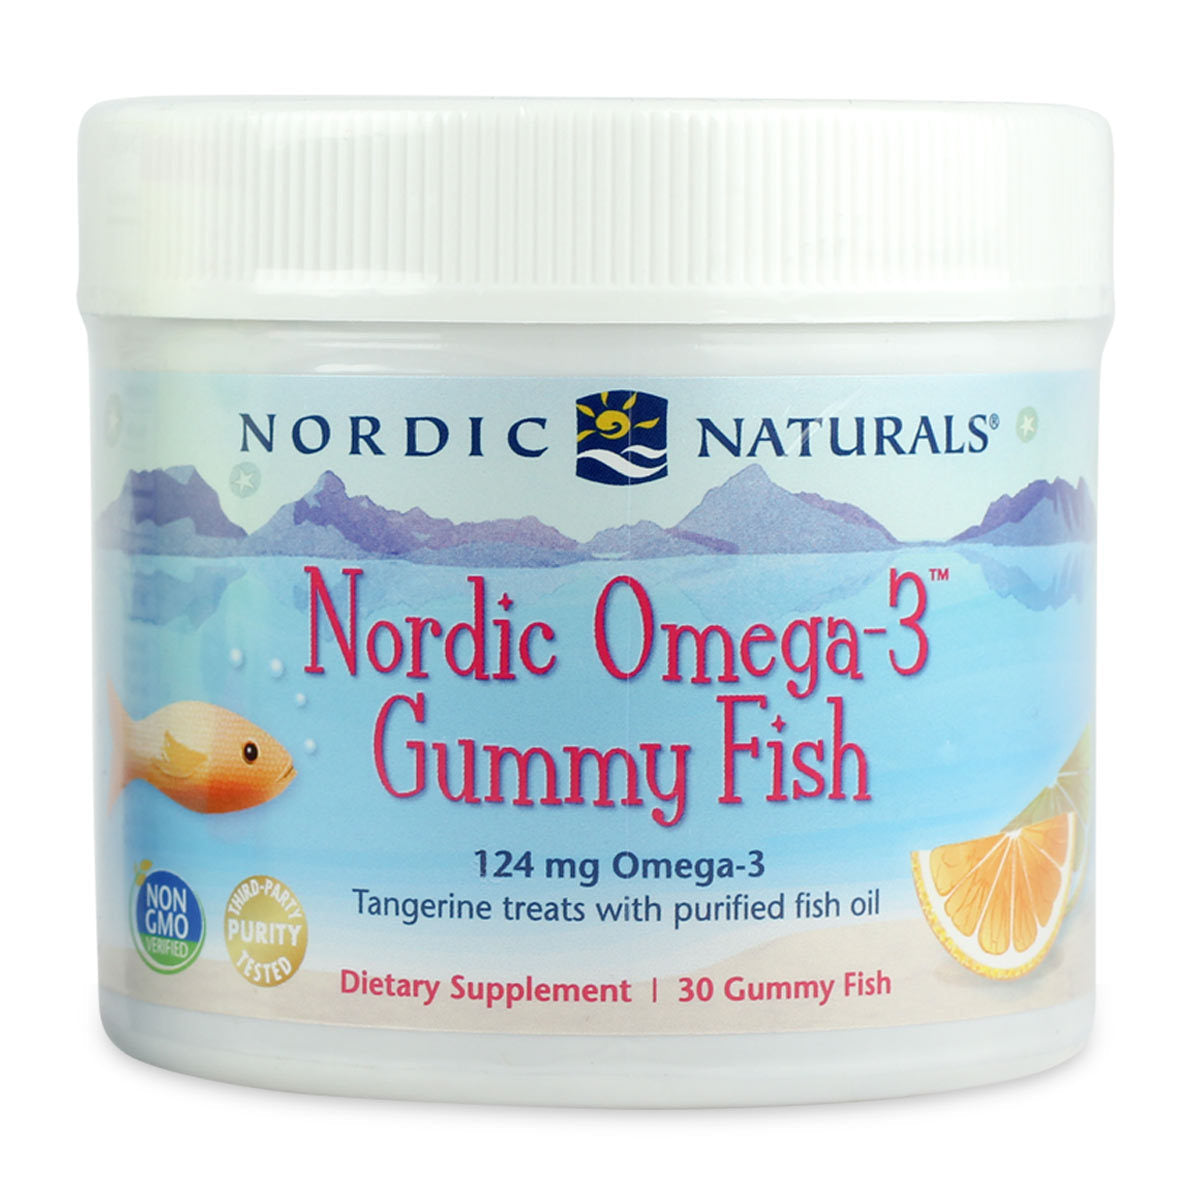 Primary image of Nordic Omega-3 Gummy Fish